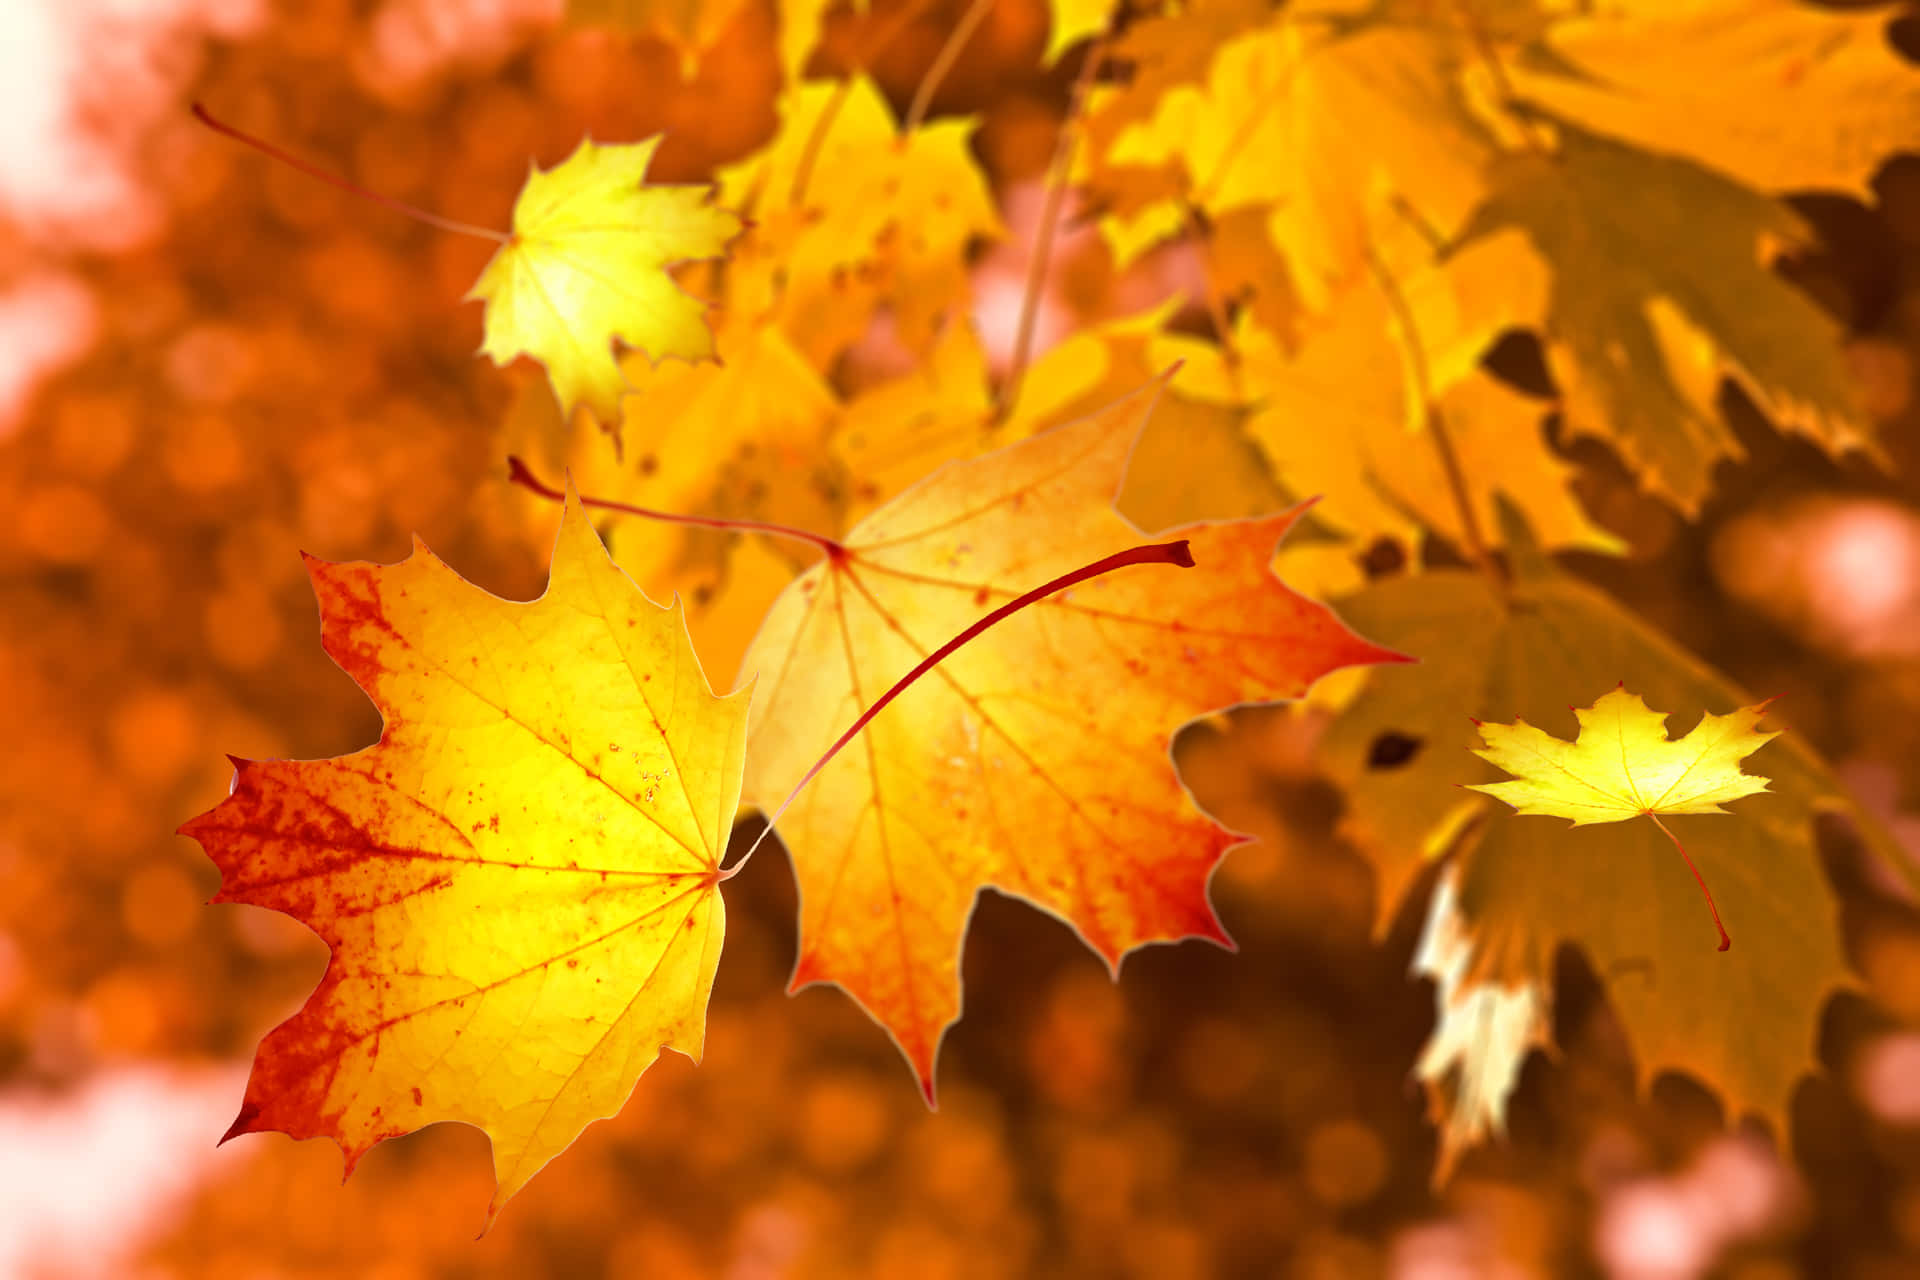 "A vibrant autumn leaf on a sunny day" Wallpaper